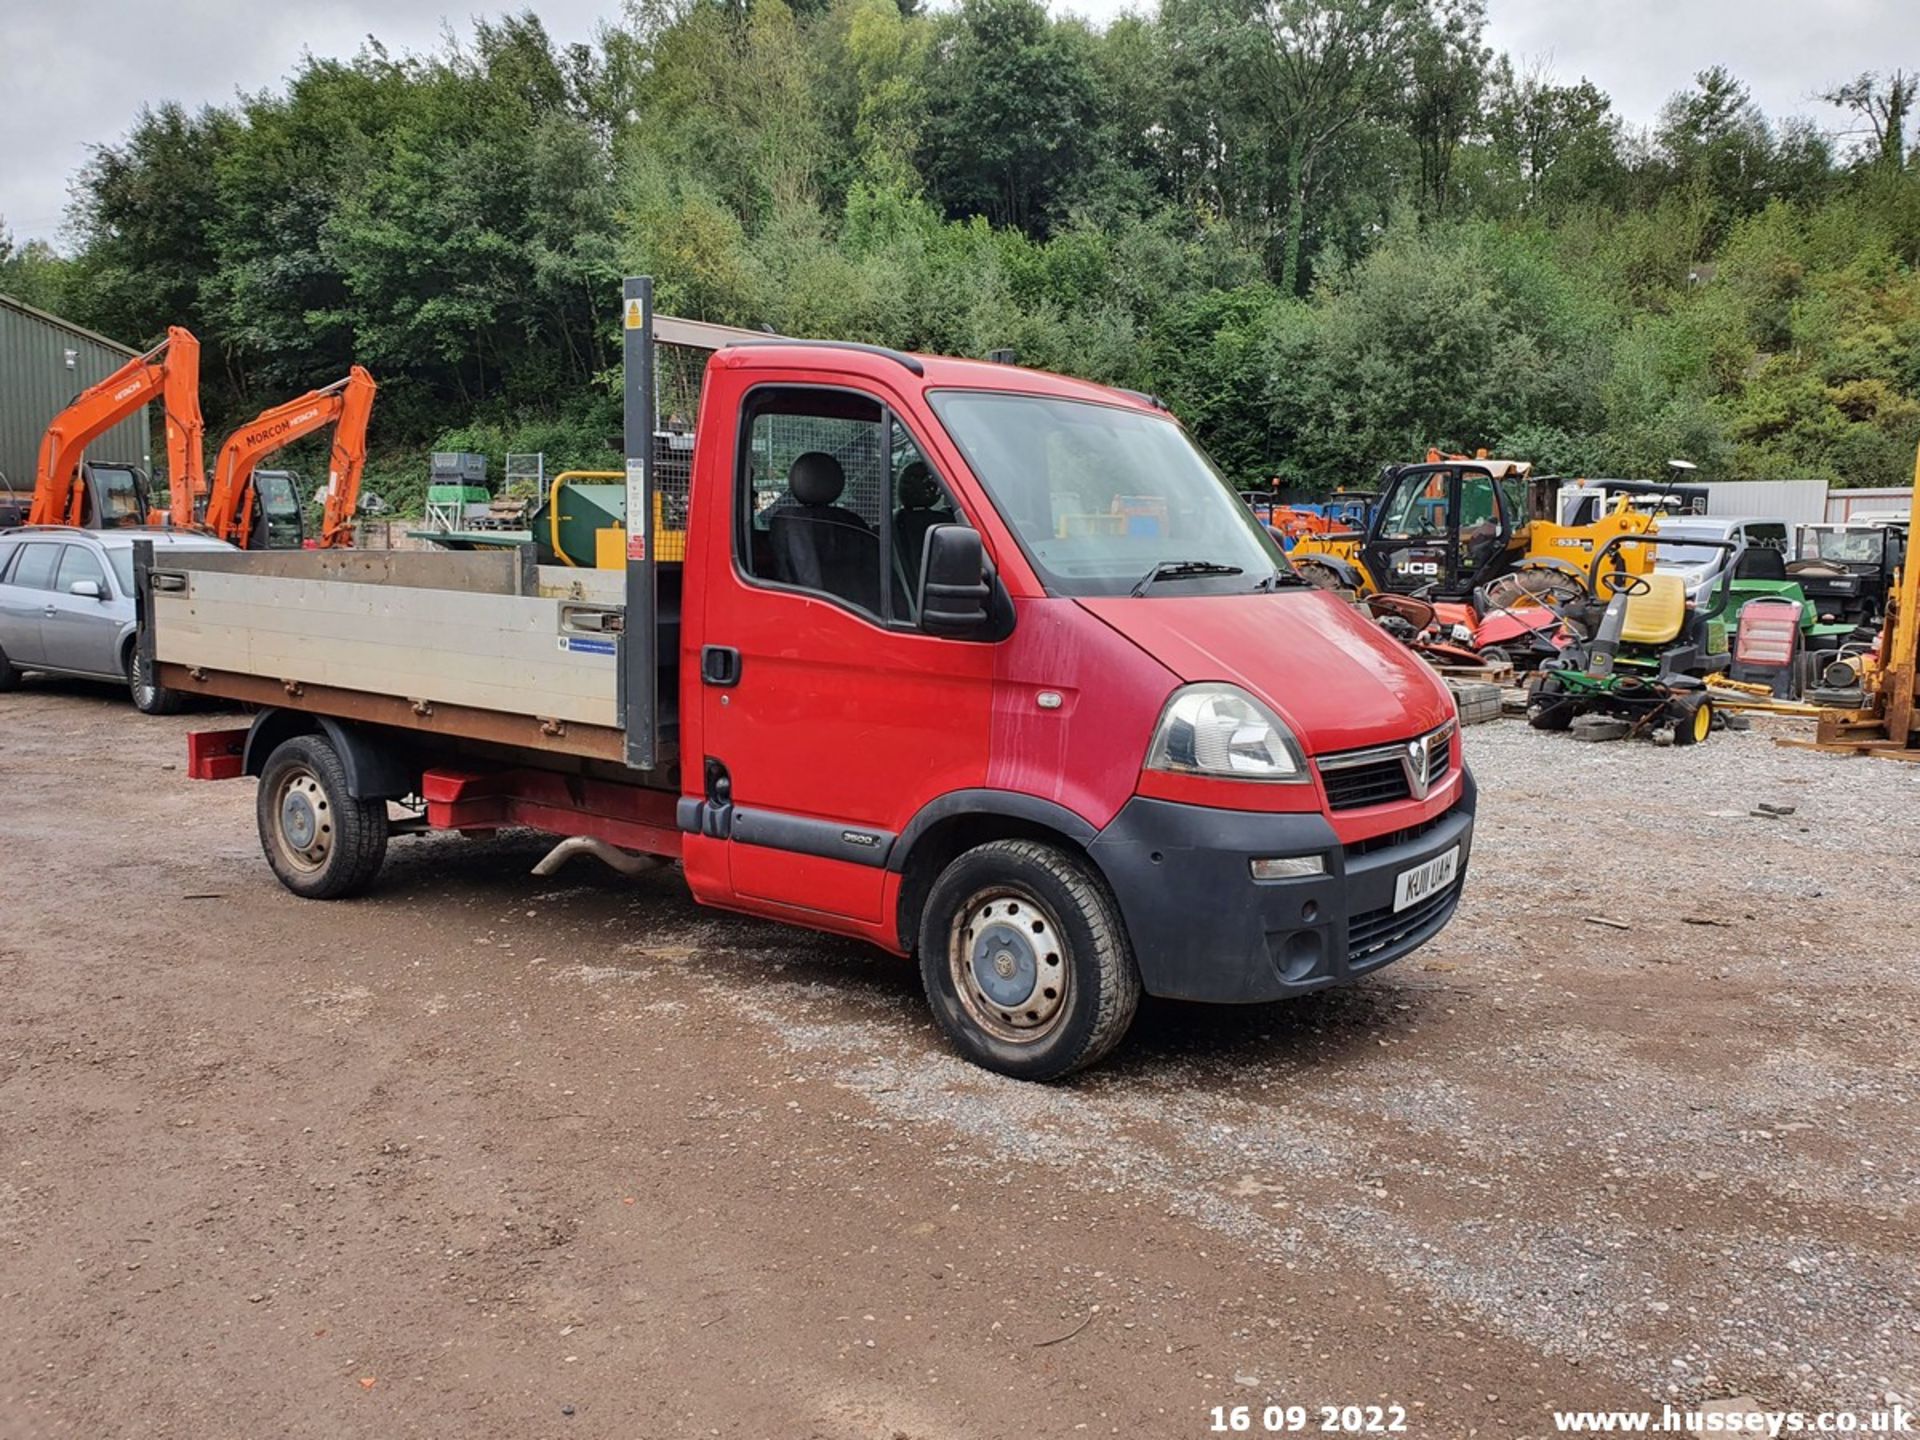 11/11 VAUXHALL MOVANO 3500 CDTI MWB - 2464cc 2dr Tipper (Red, 52k) - Image 3 of 44